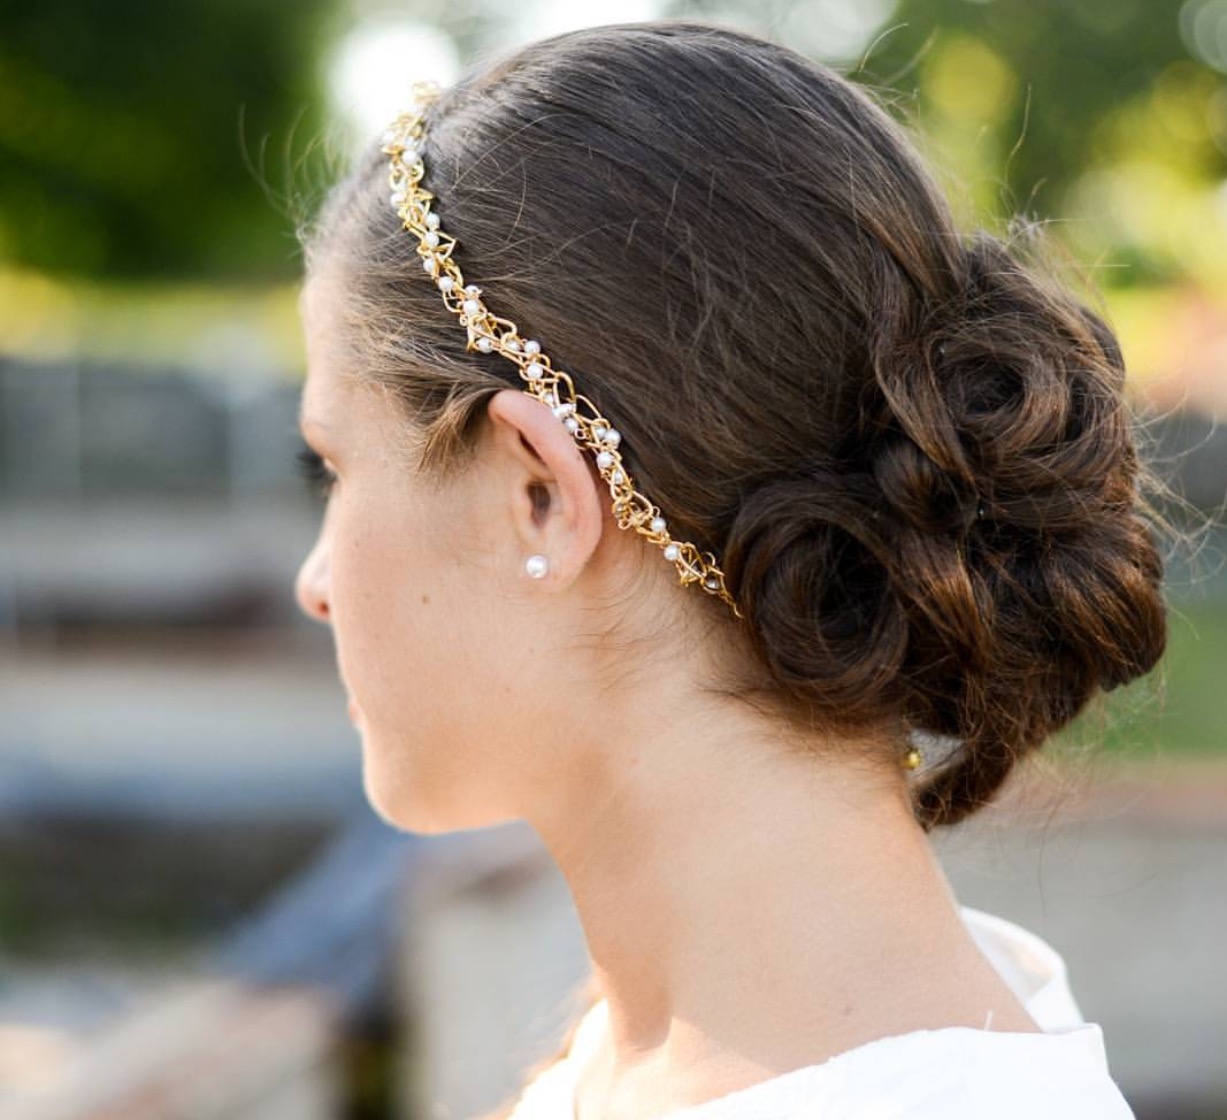 Wedding Hairstyles You'll Love. Classic Low Chignon. Mint Photography. Elegant, Vintage-Style Curls. Tim Waters Photograph. Romantic Updo With a Crown of Roses.